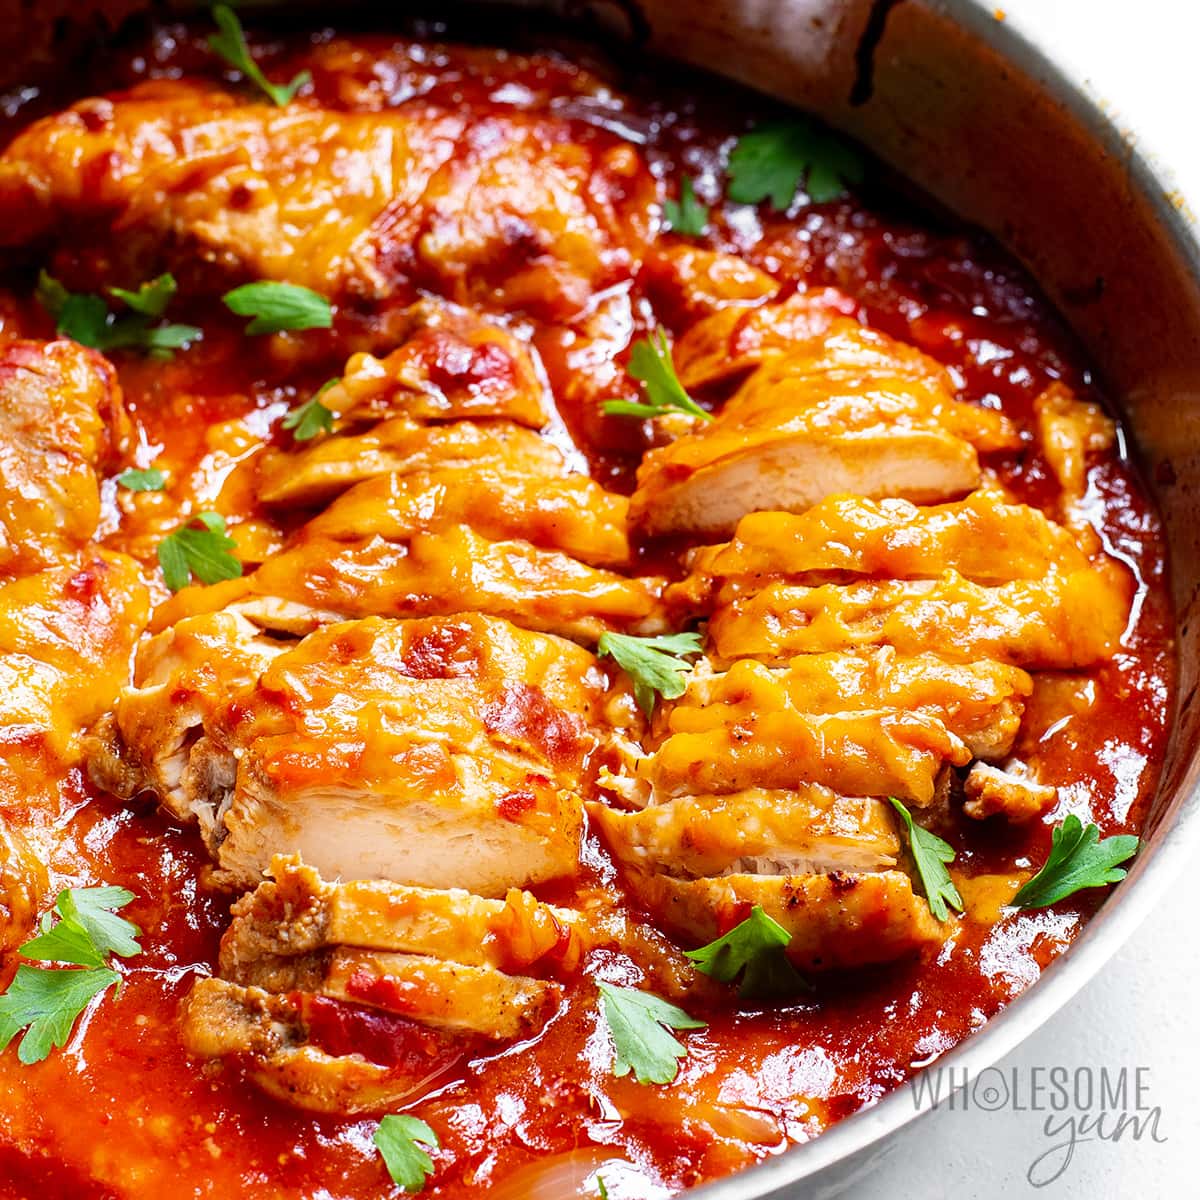 Baked salsa chicken recipe in a pan with parsley garnish.